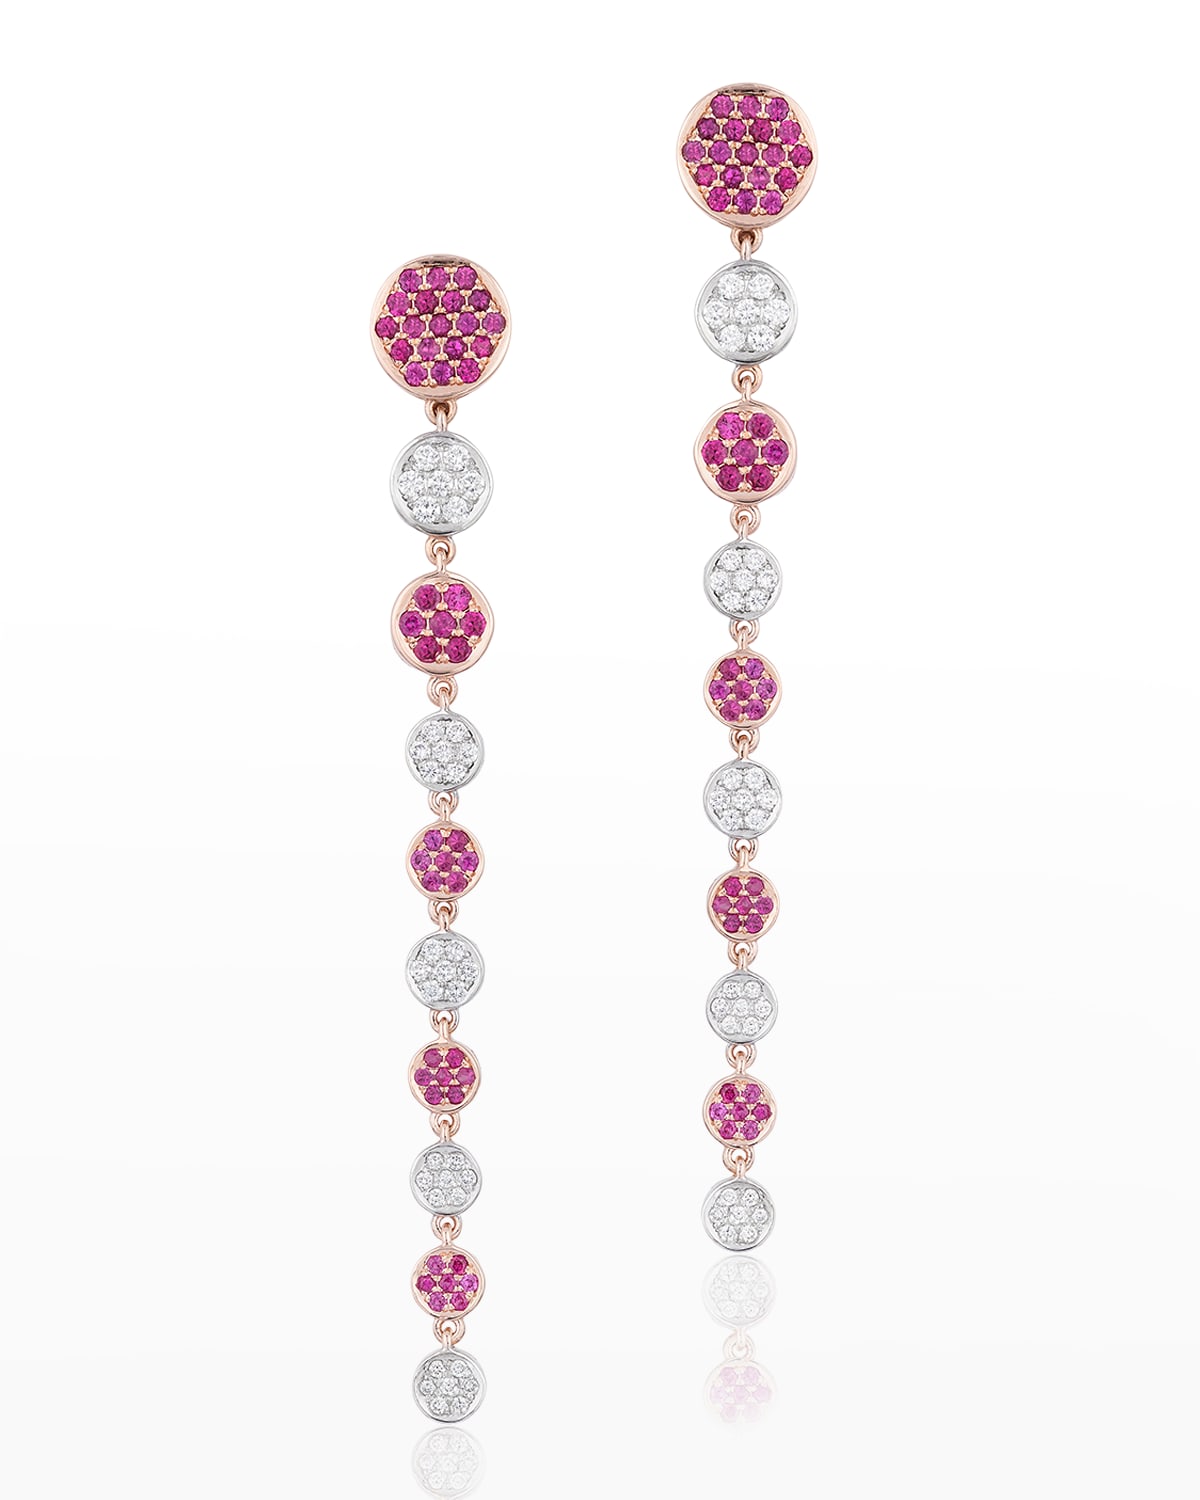 Andreoli Rose Gold Diamond And Ruby Earrings